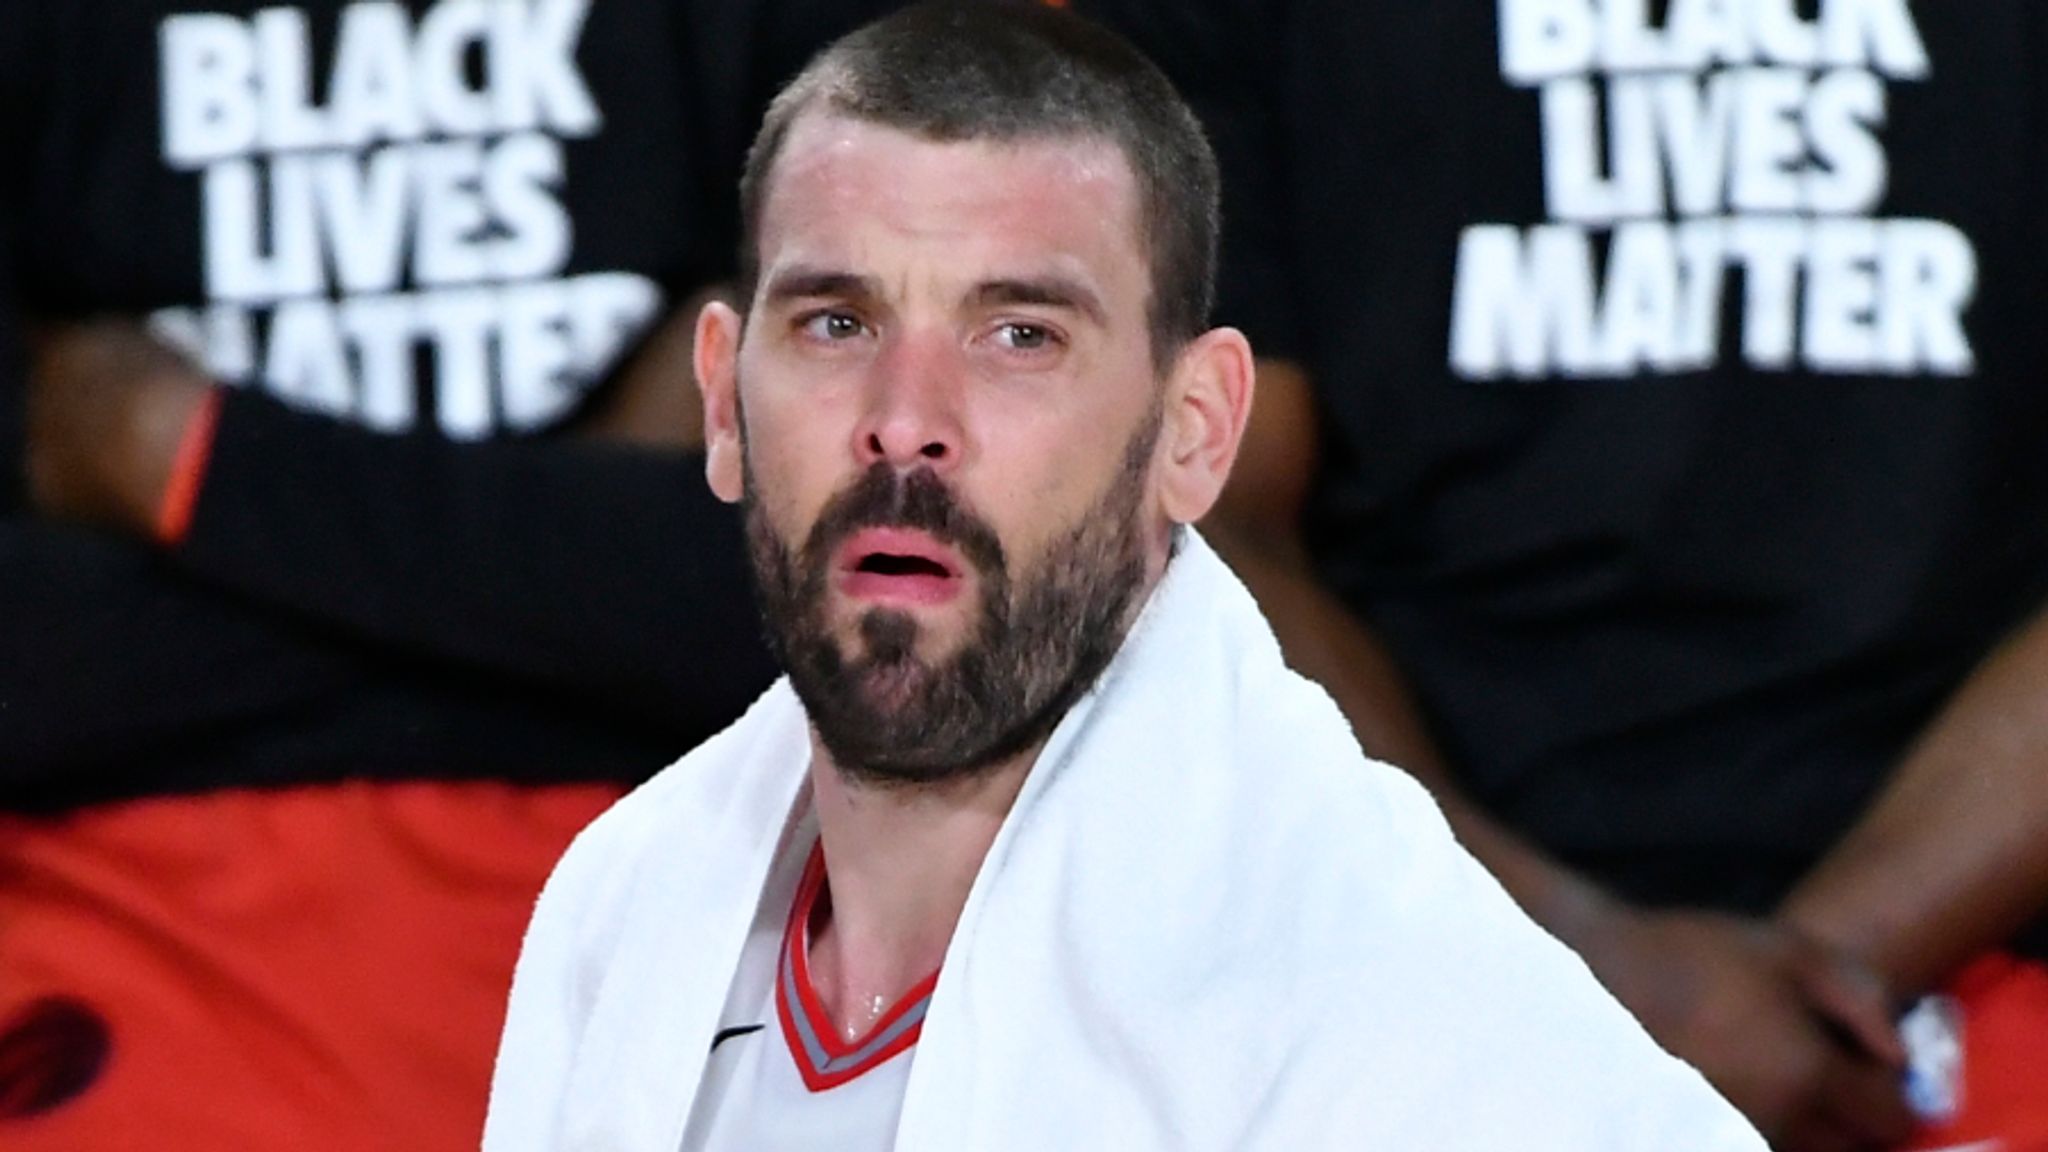 Lakers trade Marc Gasol to Memphis Grizzlies, will reportedly be waived